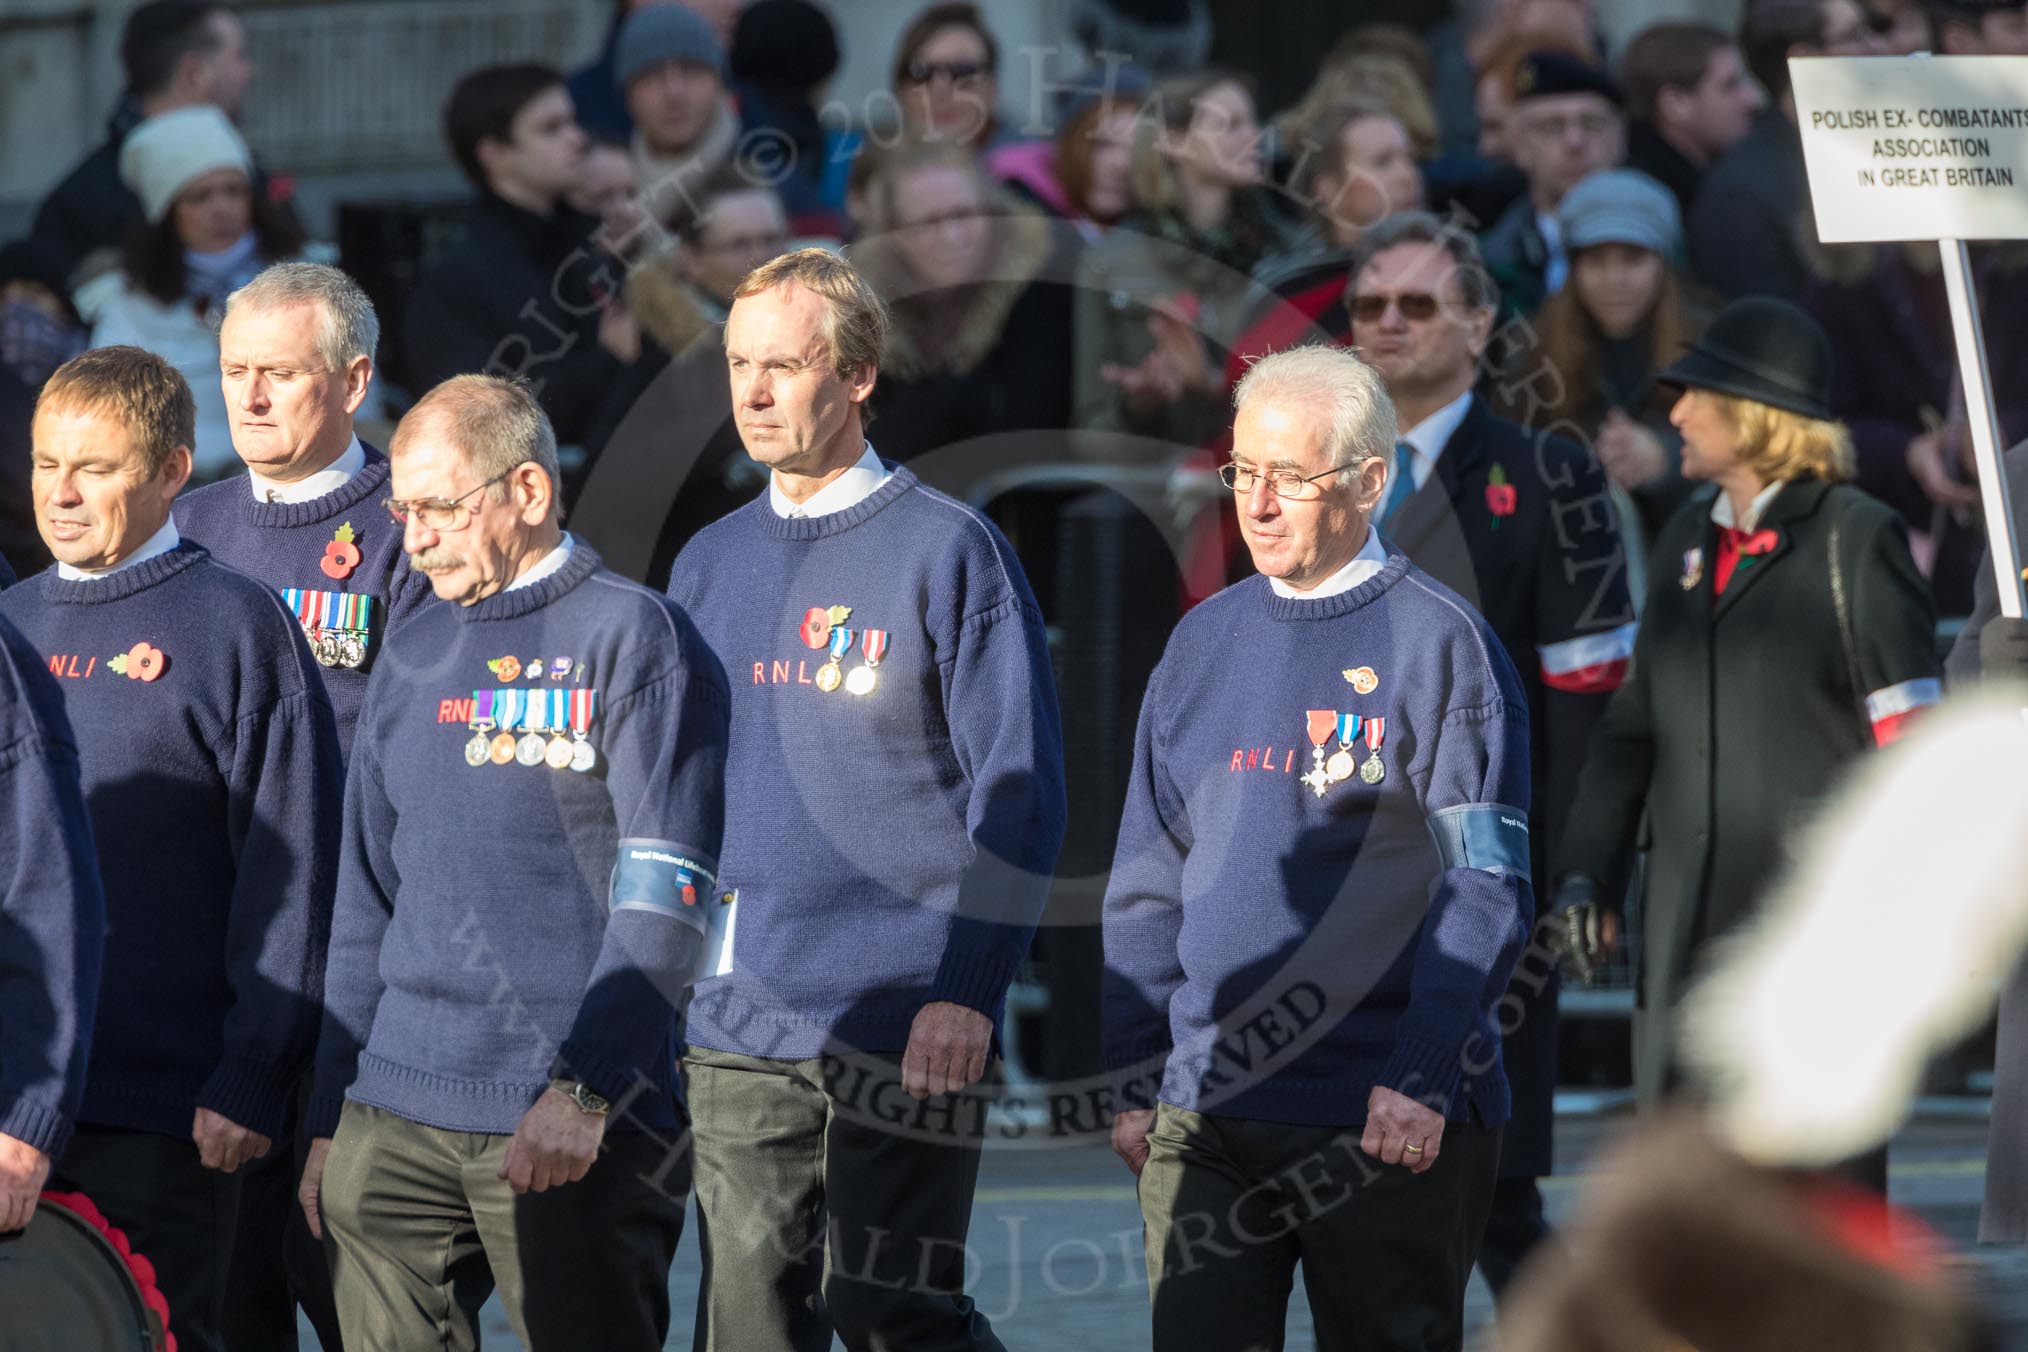 March Past, Remembrance Sunday at the Cenotaph 2016: M41 Royal National Lifeboat Institution.
Cenotaph, Whitehall, London SW1,
London,
Greater London,
United Kingdom,
on 13 November 2016 at 13:19, image #2957